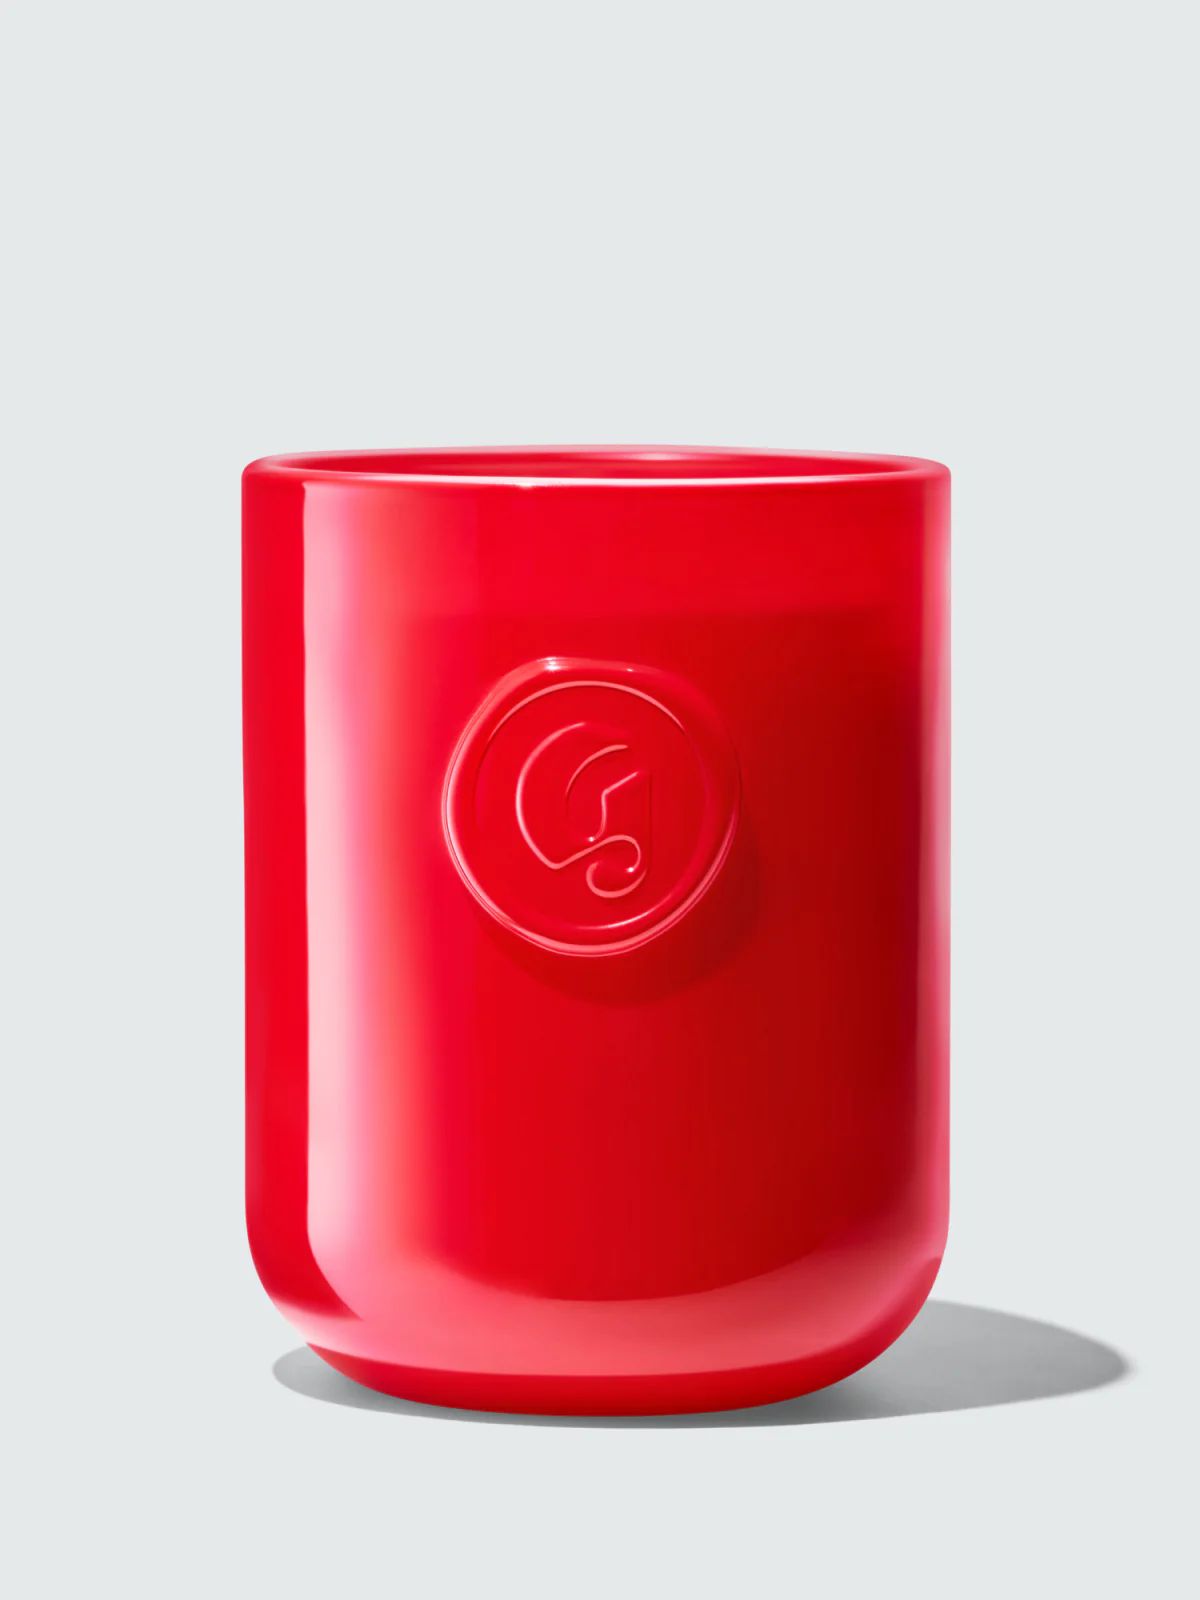 Glossier Candles | Glossier